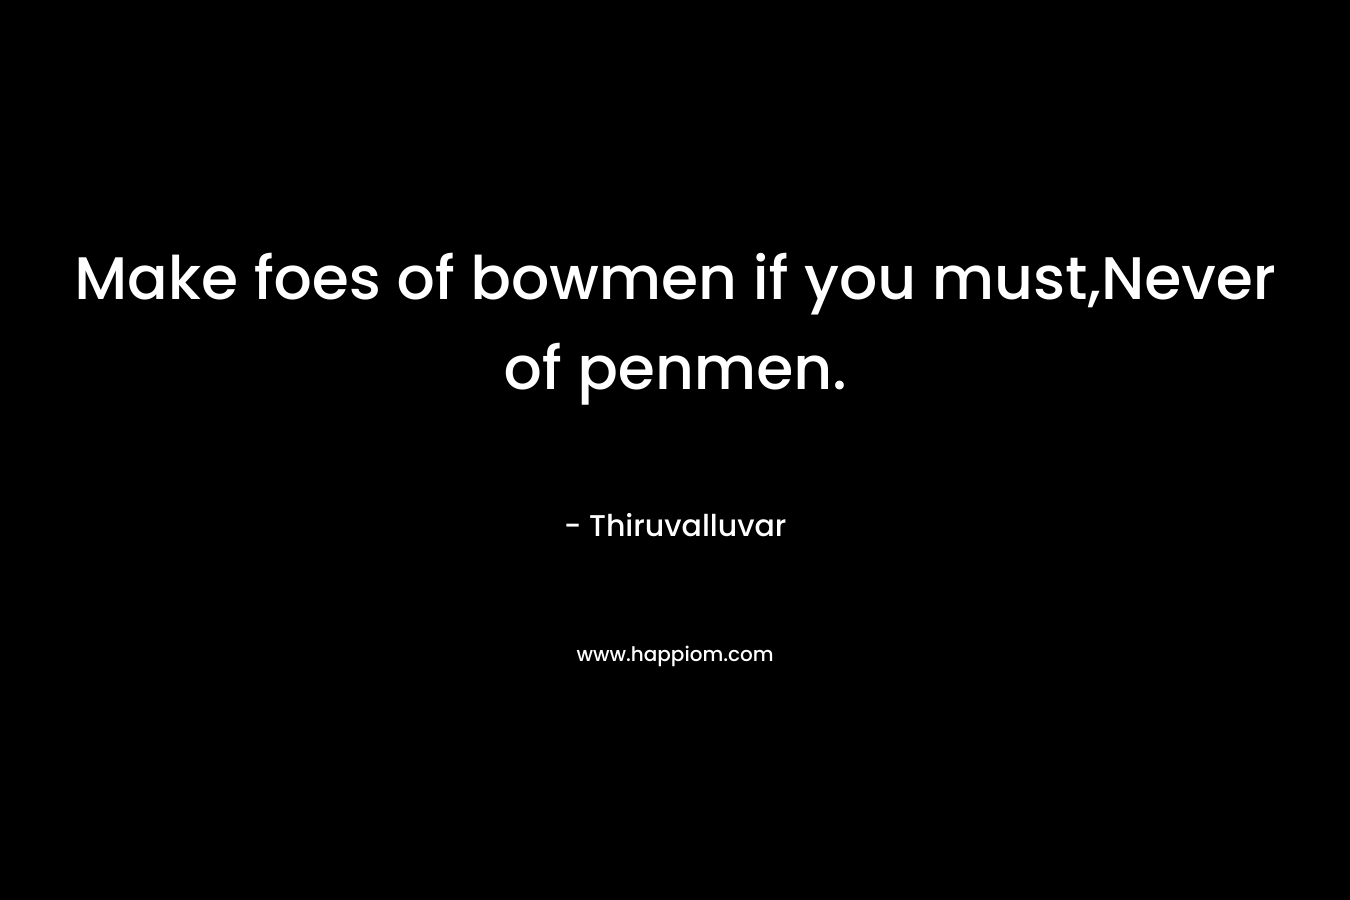 Make foes of bowmen if you must,Never of penmen.